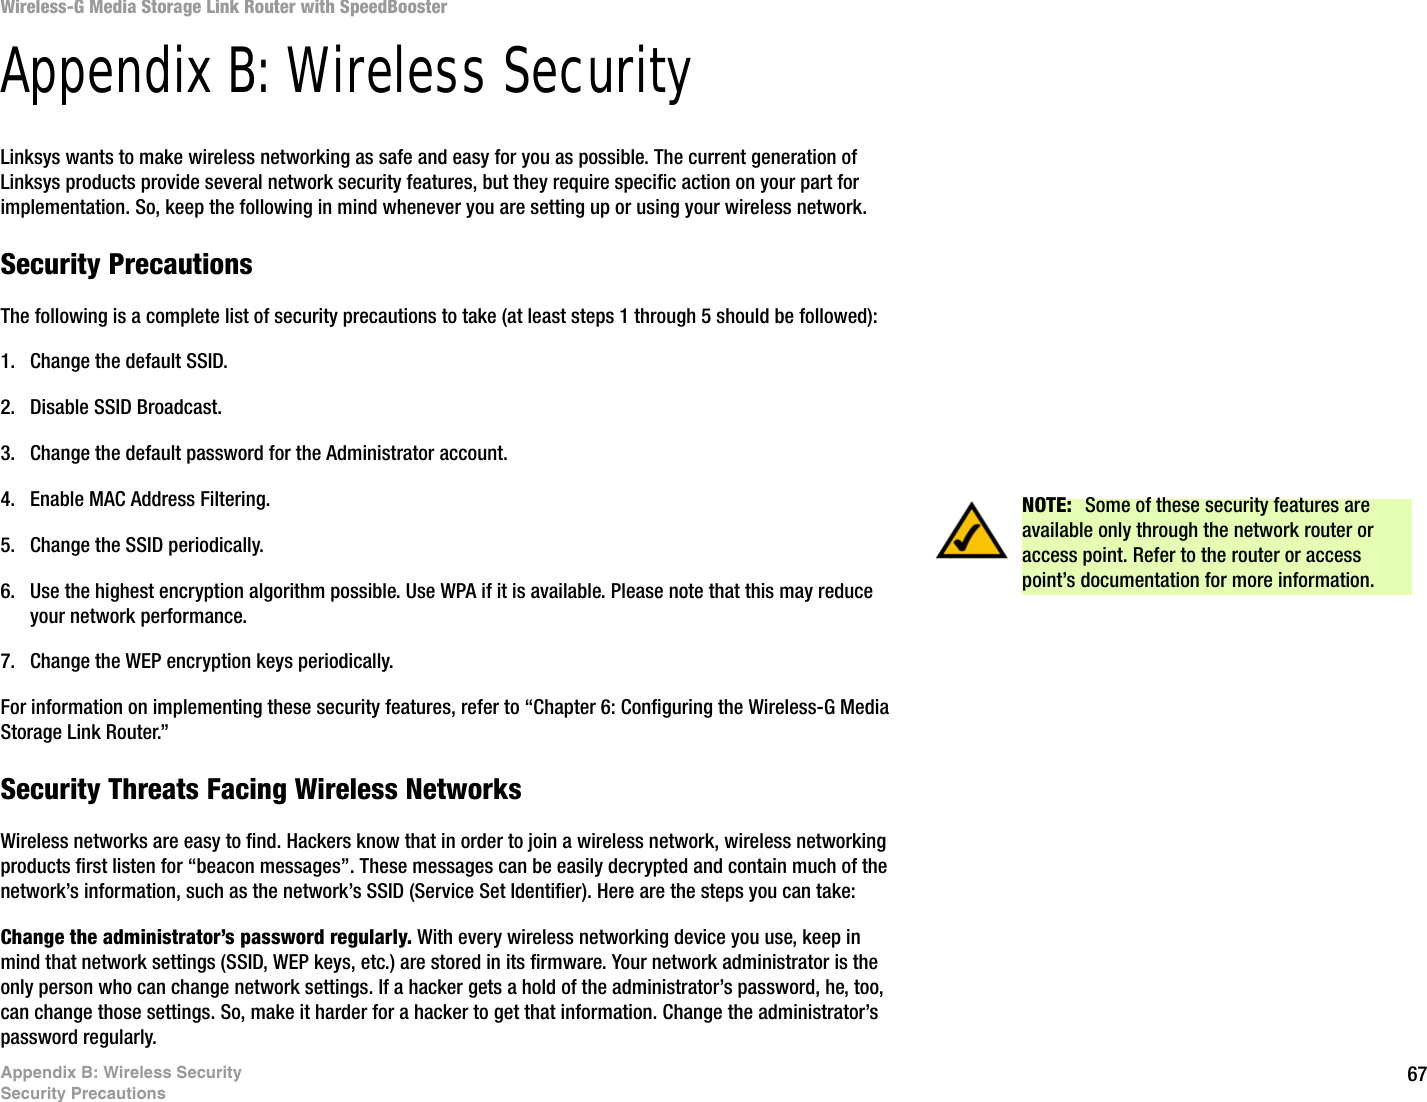 67Appendix B: Wireless SecuritySecurity PrecautionsWireless-G Media Storage Link Router with SpeedBoosterAppendix B: Wireless SecurityLinksys wants to make wireless networking as safe and easy for you as possible. The current generation of Linksys products provide several network security features, but they require specific action on your part for implementation. So, keep the following in mind whenever you are setting up or using your wireless network.Security PrecautionsThe following is a complete list of security precautions to take (at least steps 1 through 5 should be followed):1. Change the default SSID. 2. Disable SSID Broadcast. 3. Change the default password for the Administrator account. 4. Enable MAC Address Filtering. 5. Change the SSID periodically. 6. Use the highest encryption algorithm possible. Use WPA if it is available. Please note that this may reduce your network performance. 7. Change the WEP encryption keys periodically. For information on implementing these security features, refer to “Chapter 6: Configuring the Wireless-G Media Storage Link Router.”Security Threats Facing Wireless Networks Wireless networks are easy to find. Hackers know that in order to join a wireless network, wireless networking products first listen for “beacon messages”. These messages can be easily decrypted and contain much of the network’s information, such as the network’s SSID (Service Set Identifier). Here are the steps you can take:Change the administrator’s password regularly. With every wireless networking device you use, keep in mind that network settings (SSID, WEP keys, etc.) are stored in its firmware. Your network administrator is the only person who can change network settings. If a hacker gets a hold of the administrator’s password, he, too, can change those settings. So, make it harder for a hacker to get that information. Change the administrator’s password regularly.NOTE:  Some of these security features are available only through the network router or access point. Refer to the router or access point’s documentation for more information.